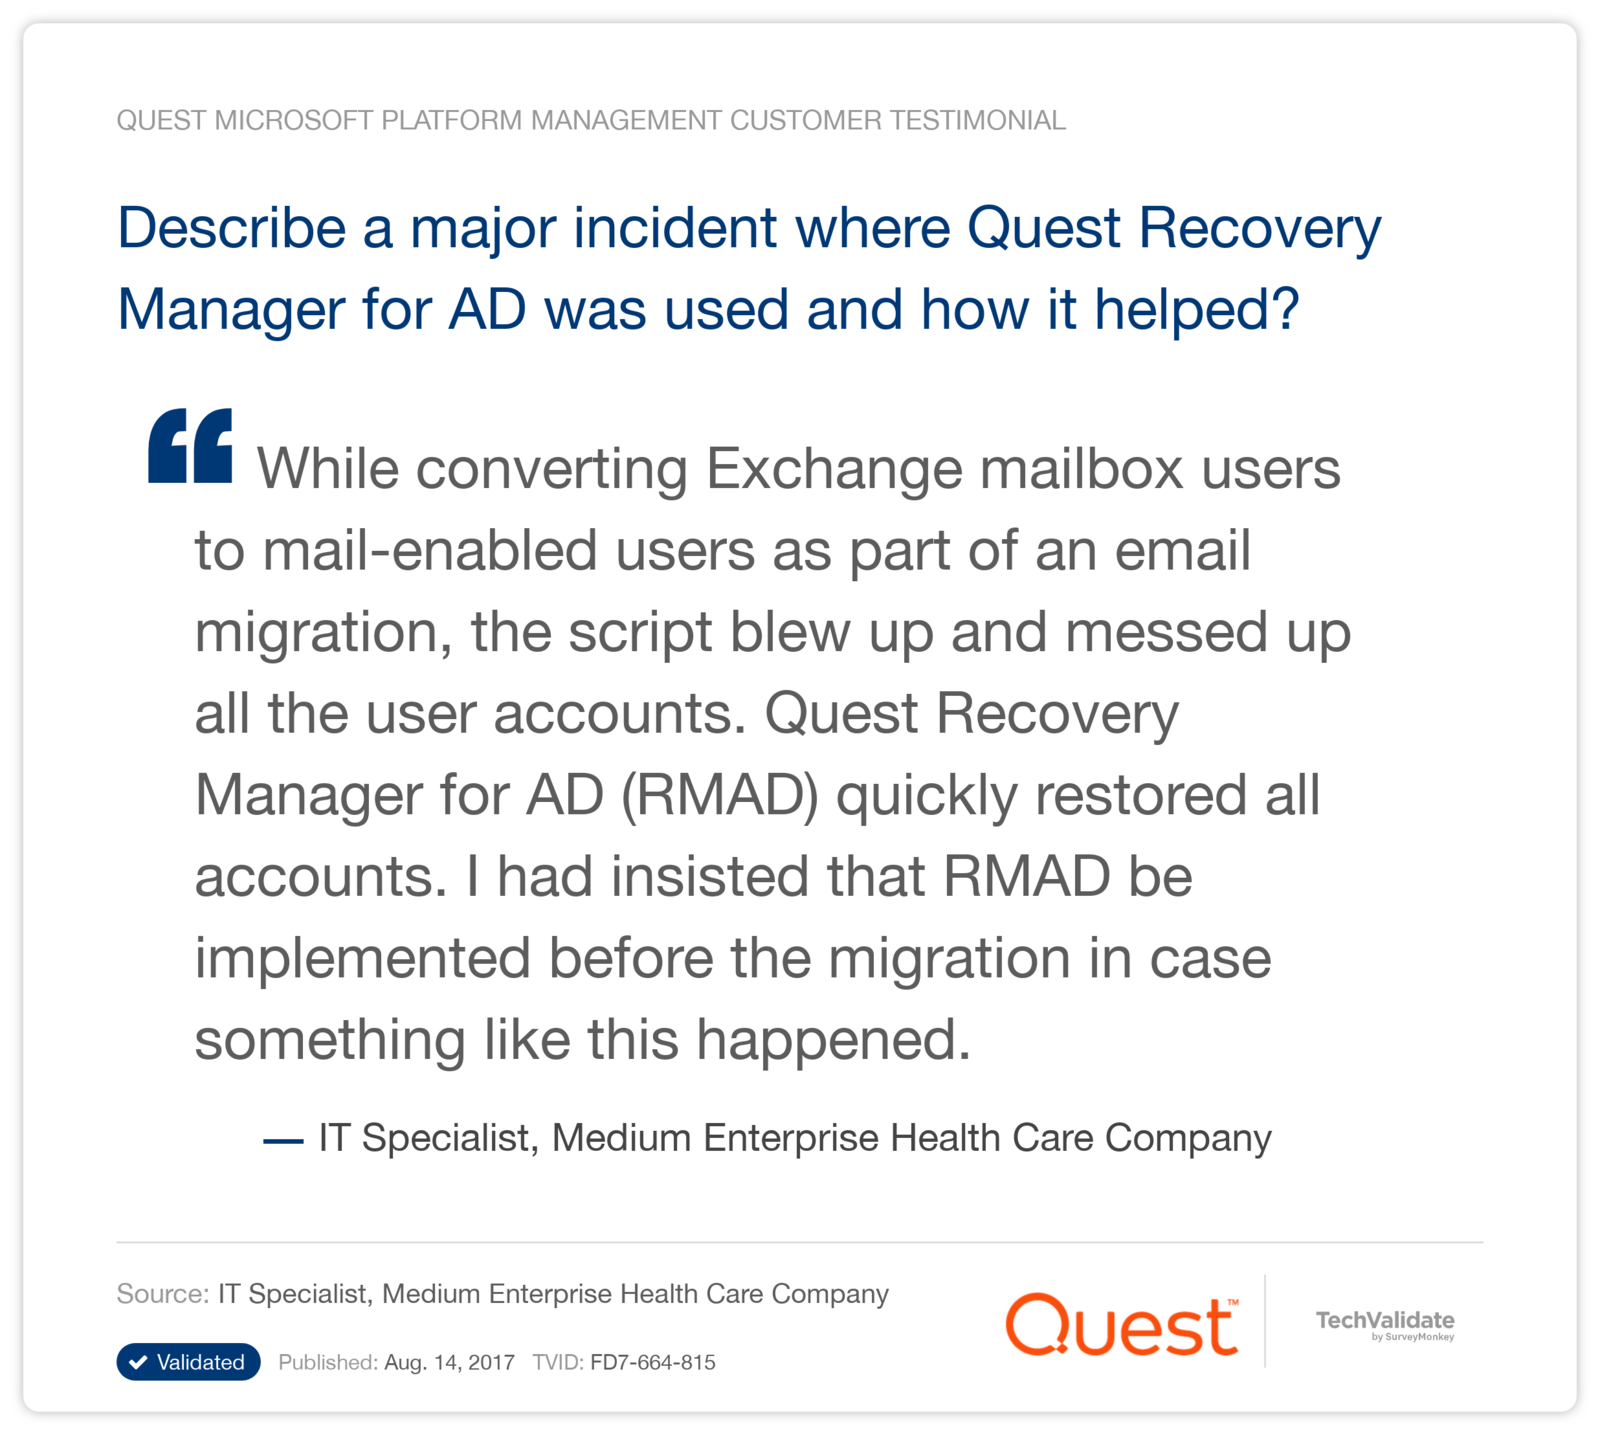 Describe a major incident where Quest Recovery Manager for AD was used and how it helped?